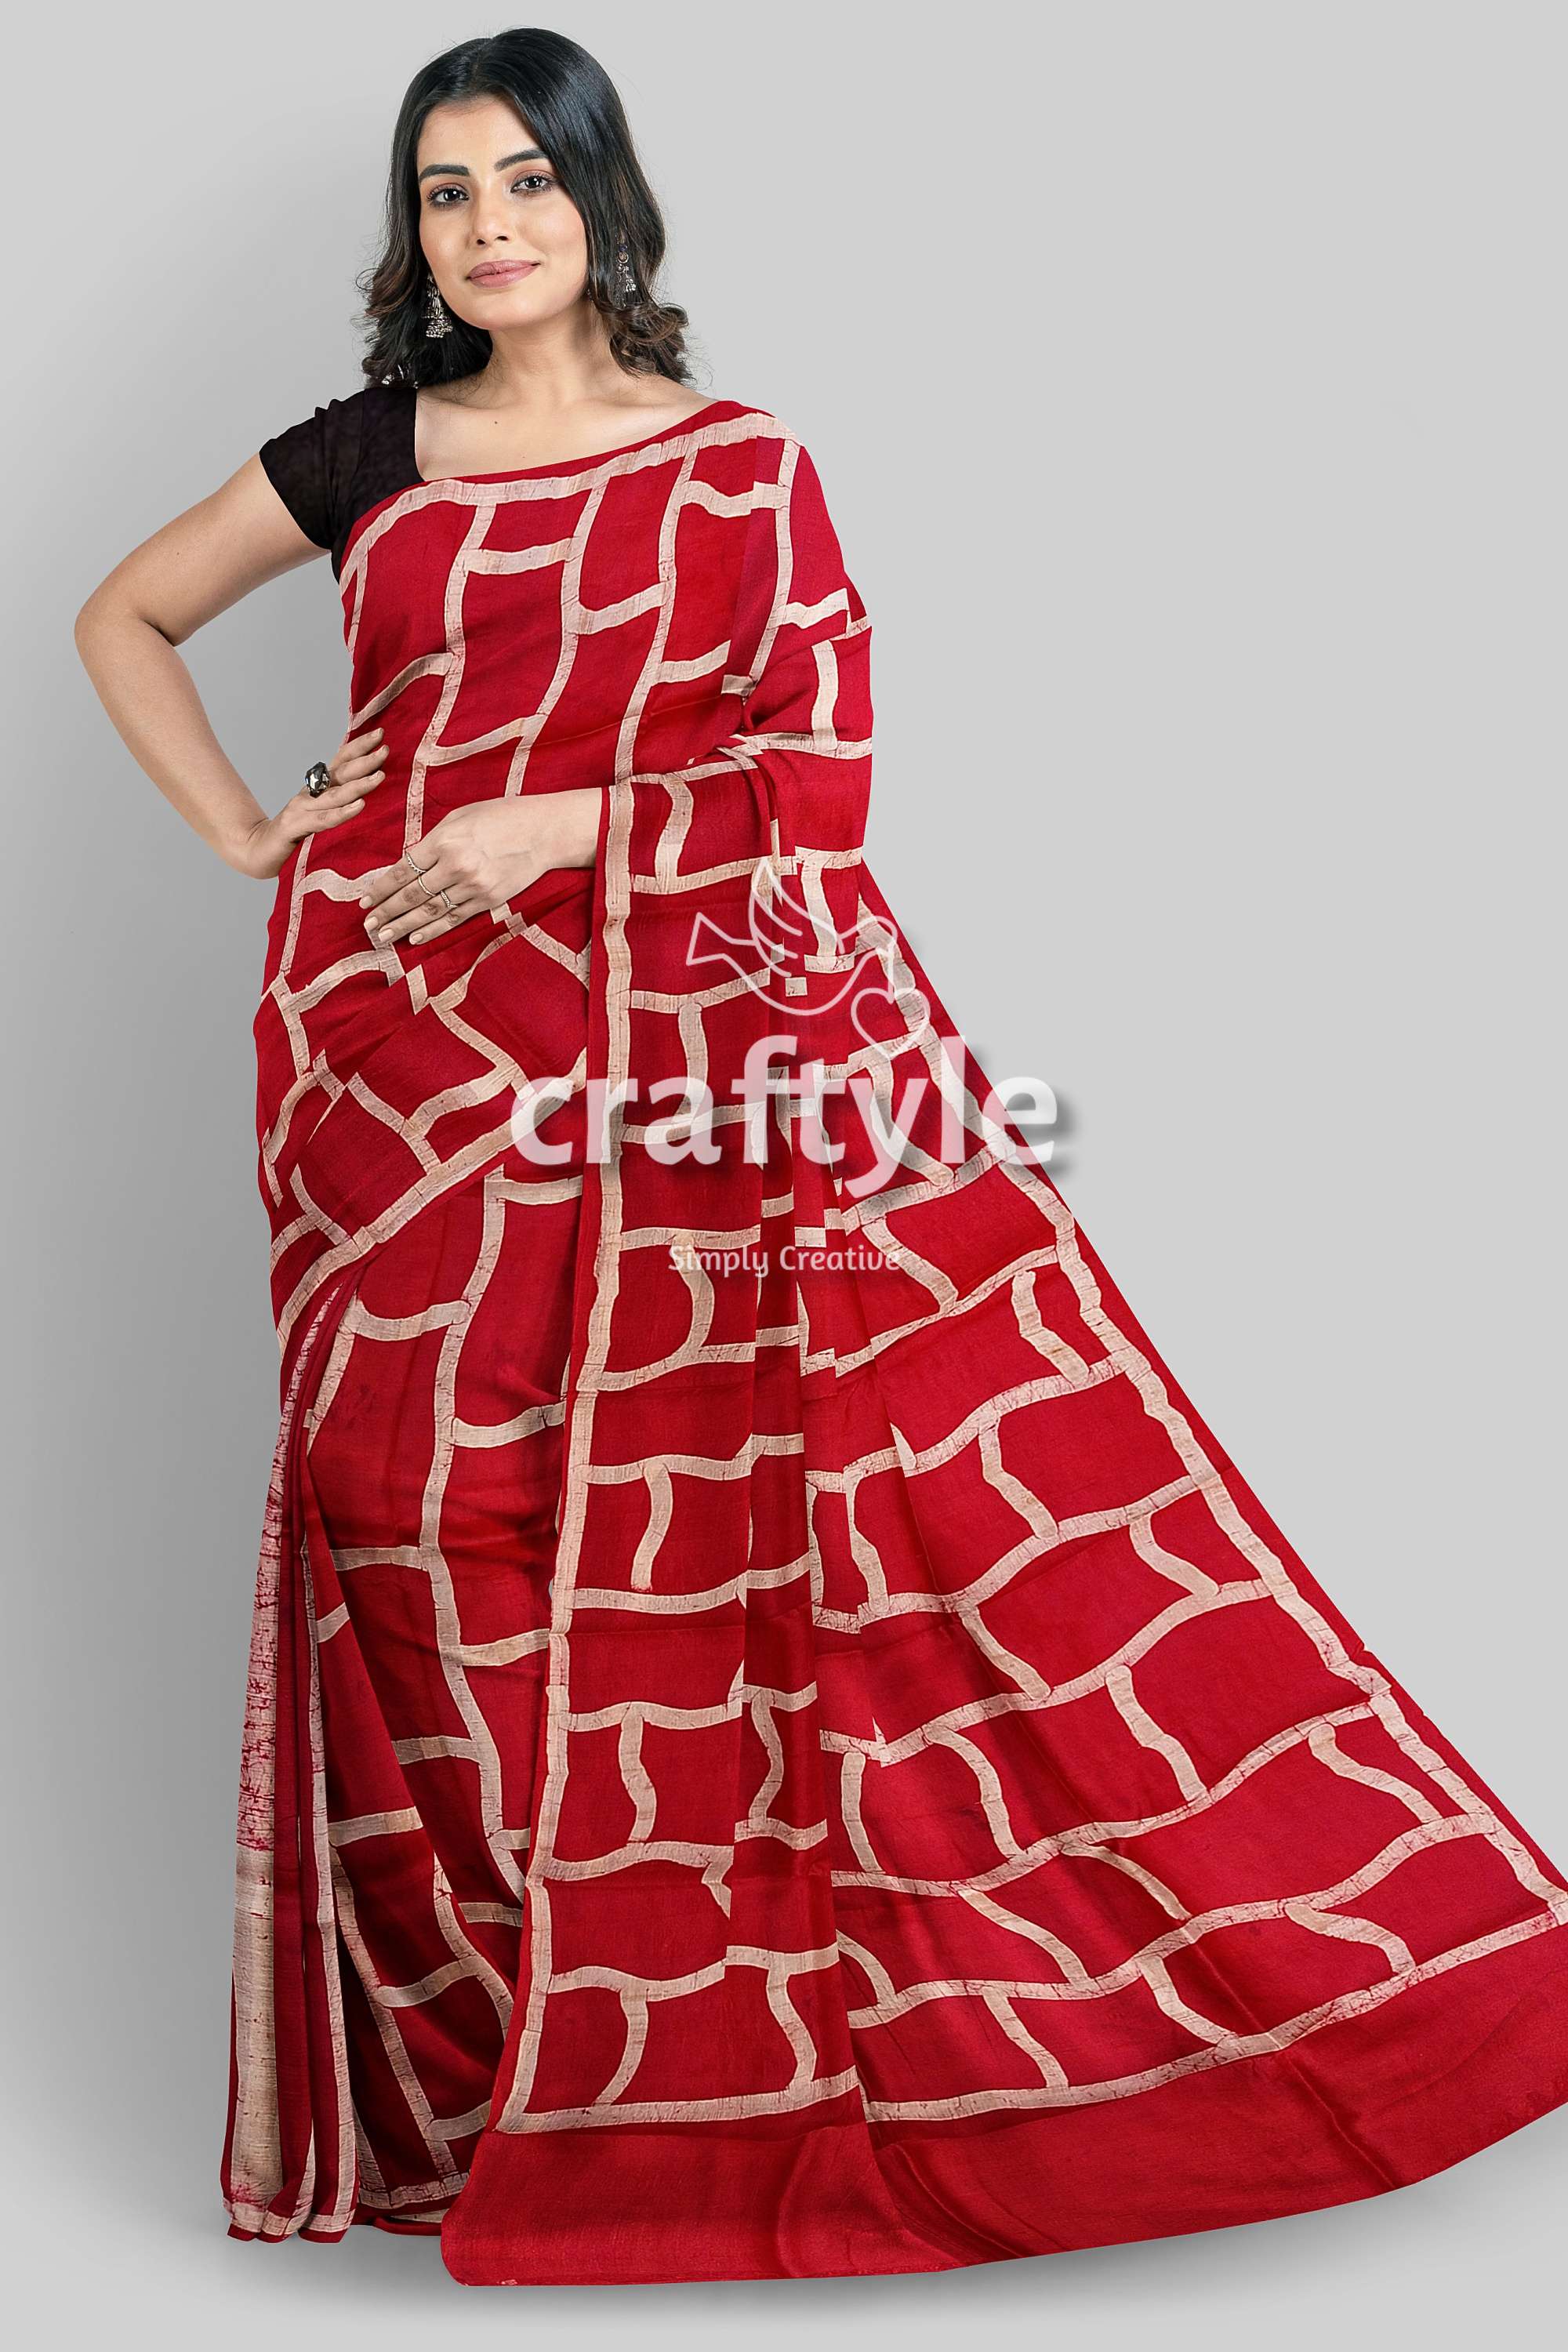 Carnation Red and White Hand Batik Mulberry Pure Silk Saree - Craftyle